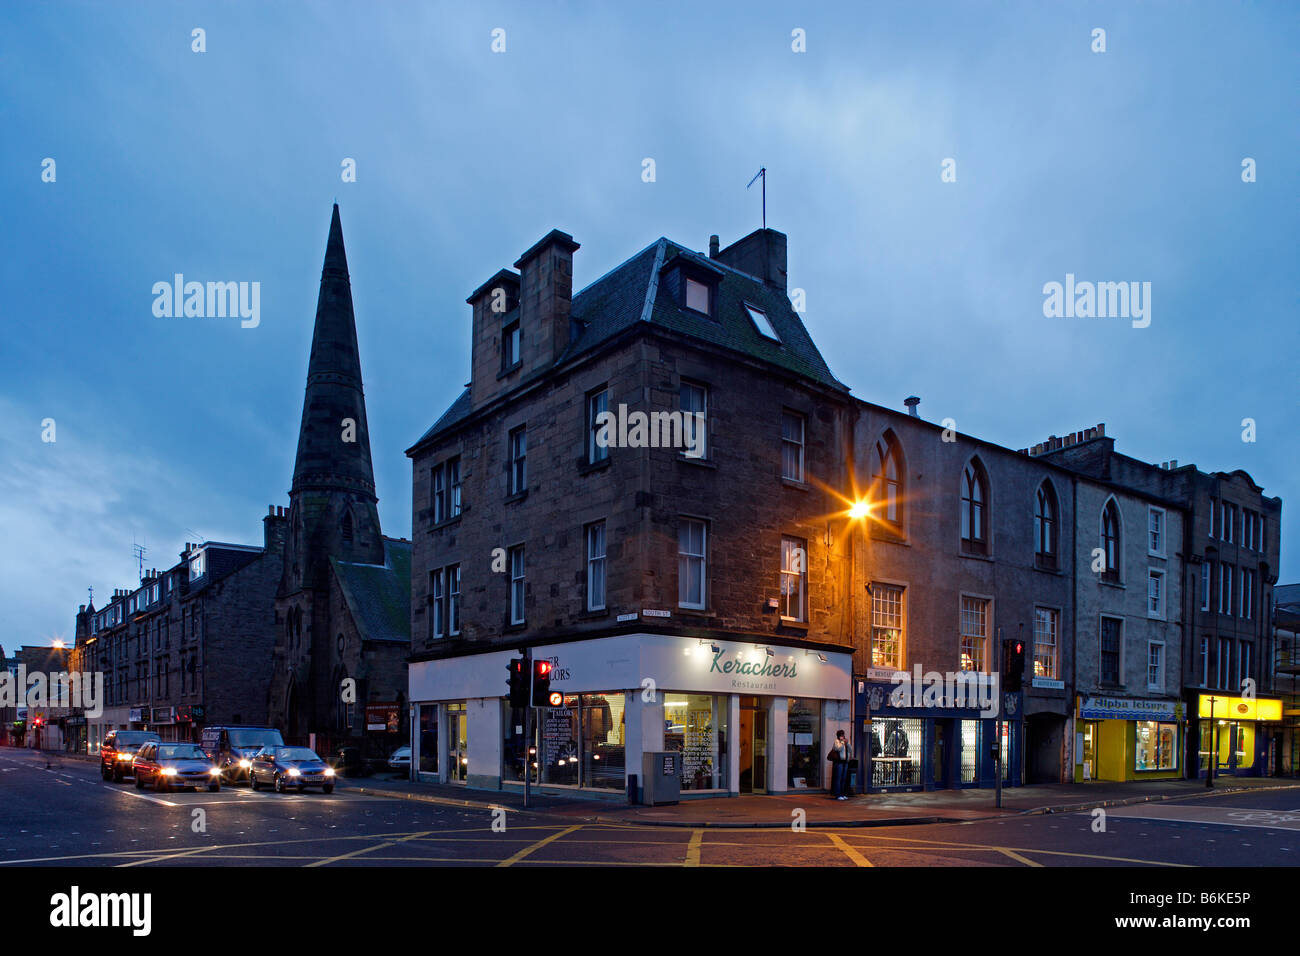 Perth High Street town center typical buildings Perthshire Scotland UK Stock Photo